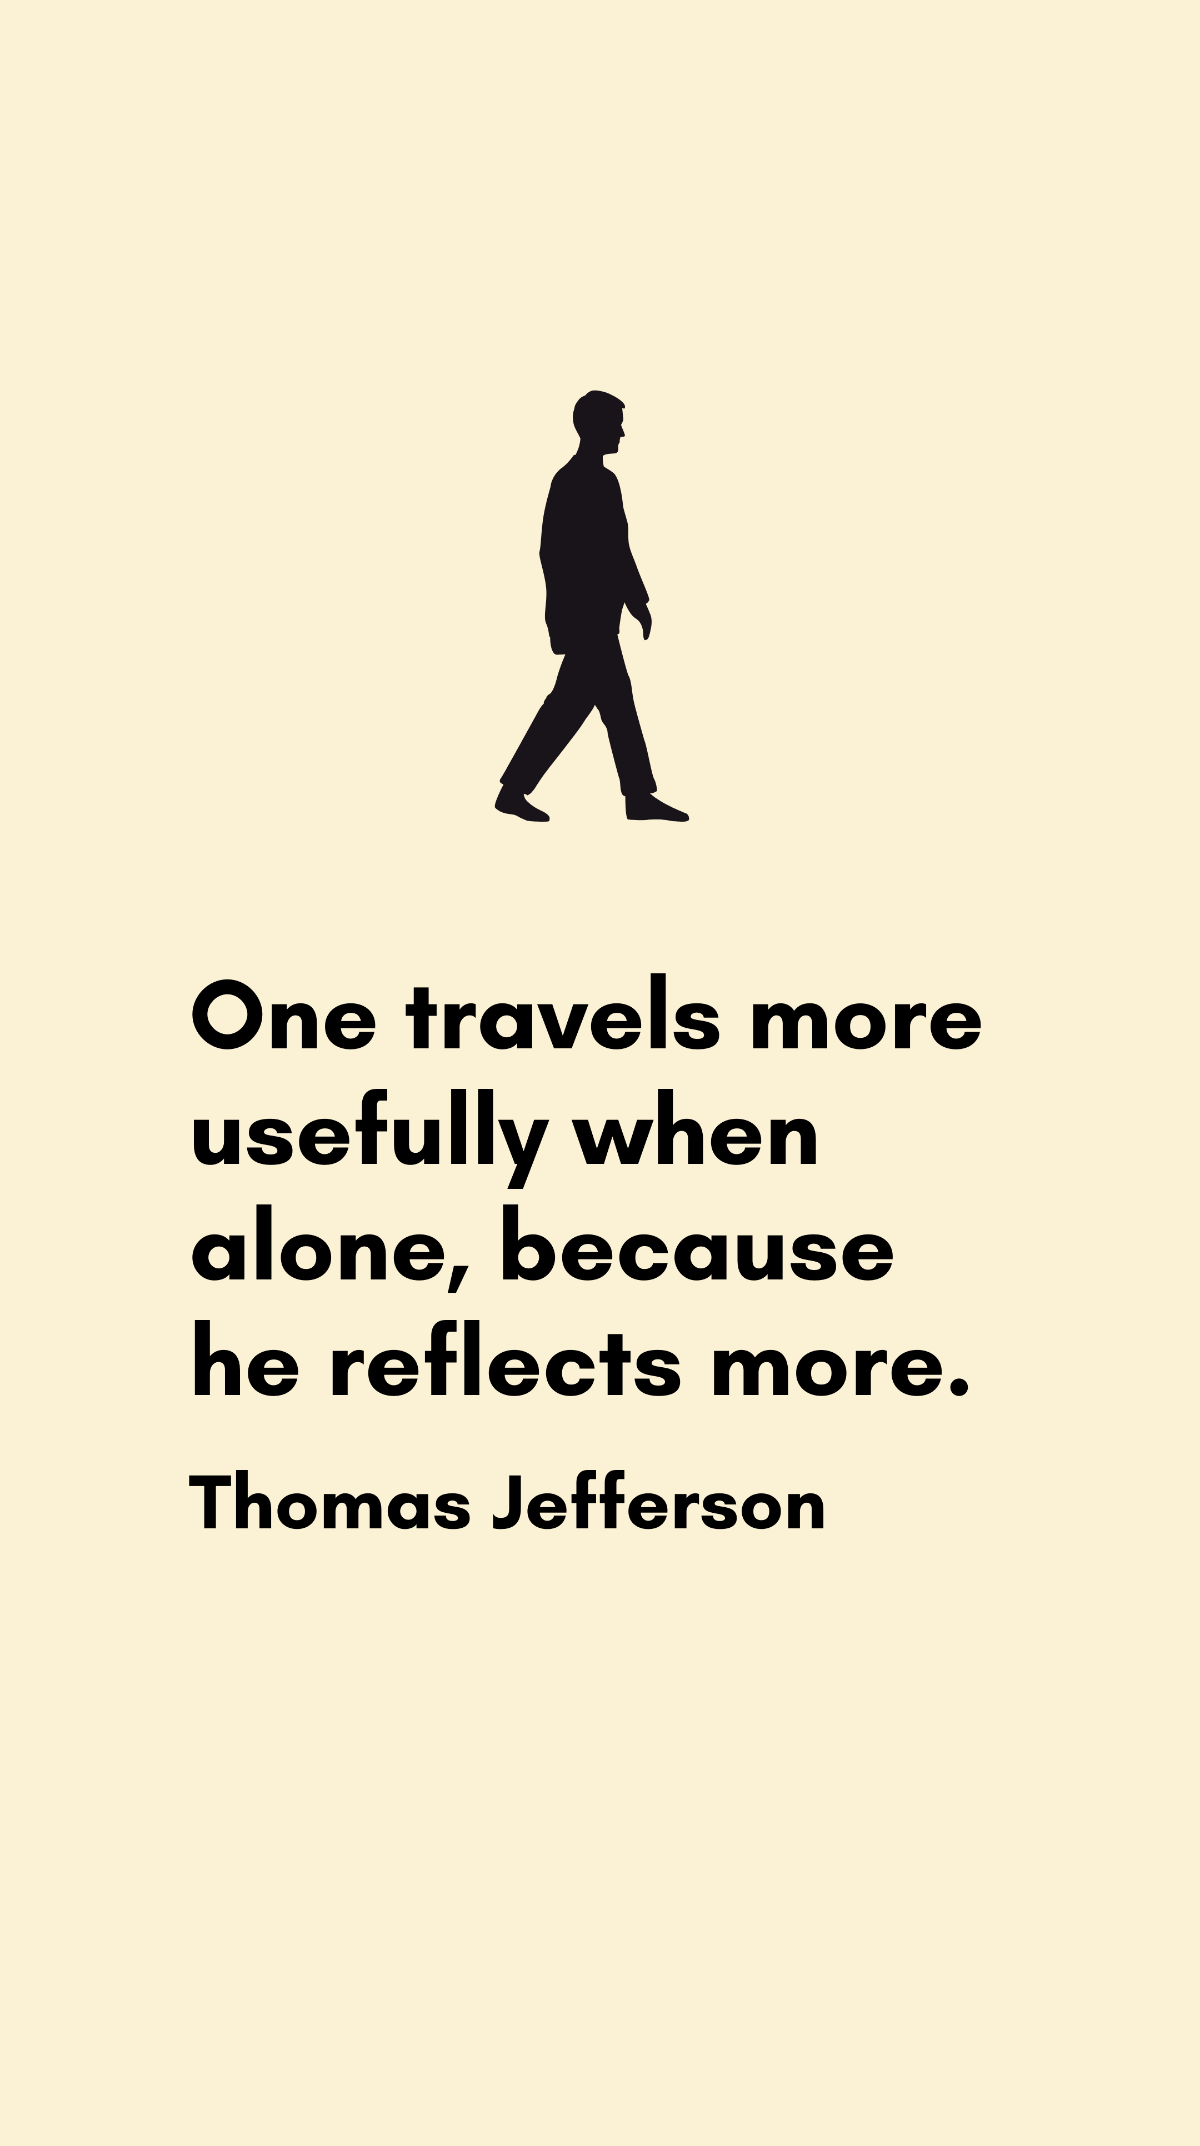 Free Thomas Jefferson - One travels more usefully when alone, because he reflects more. Template